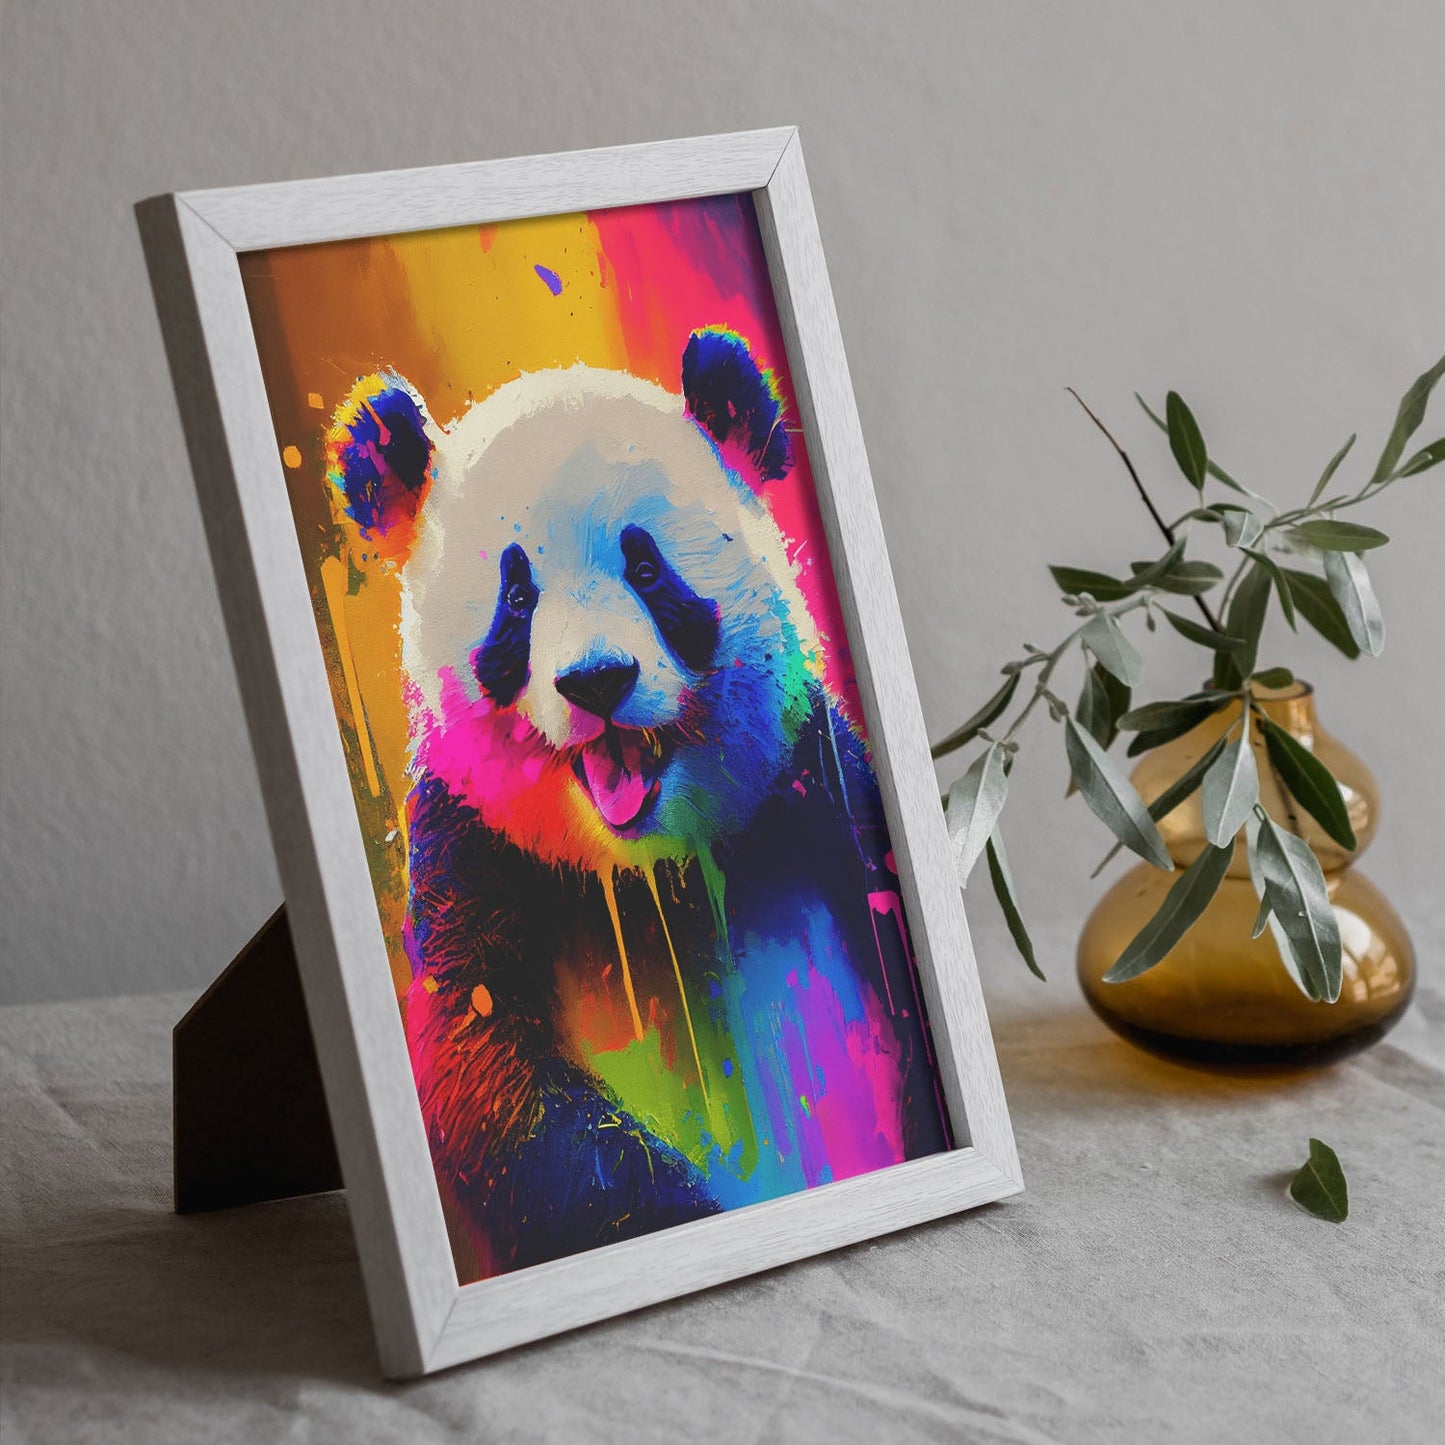 Nacnic Abstract smiling Panda in Lisa Fran Style_2. Aesthetic Wall Art Prints for Bedroom or Living Room Design.